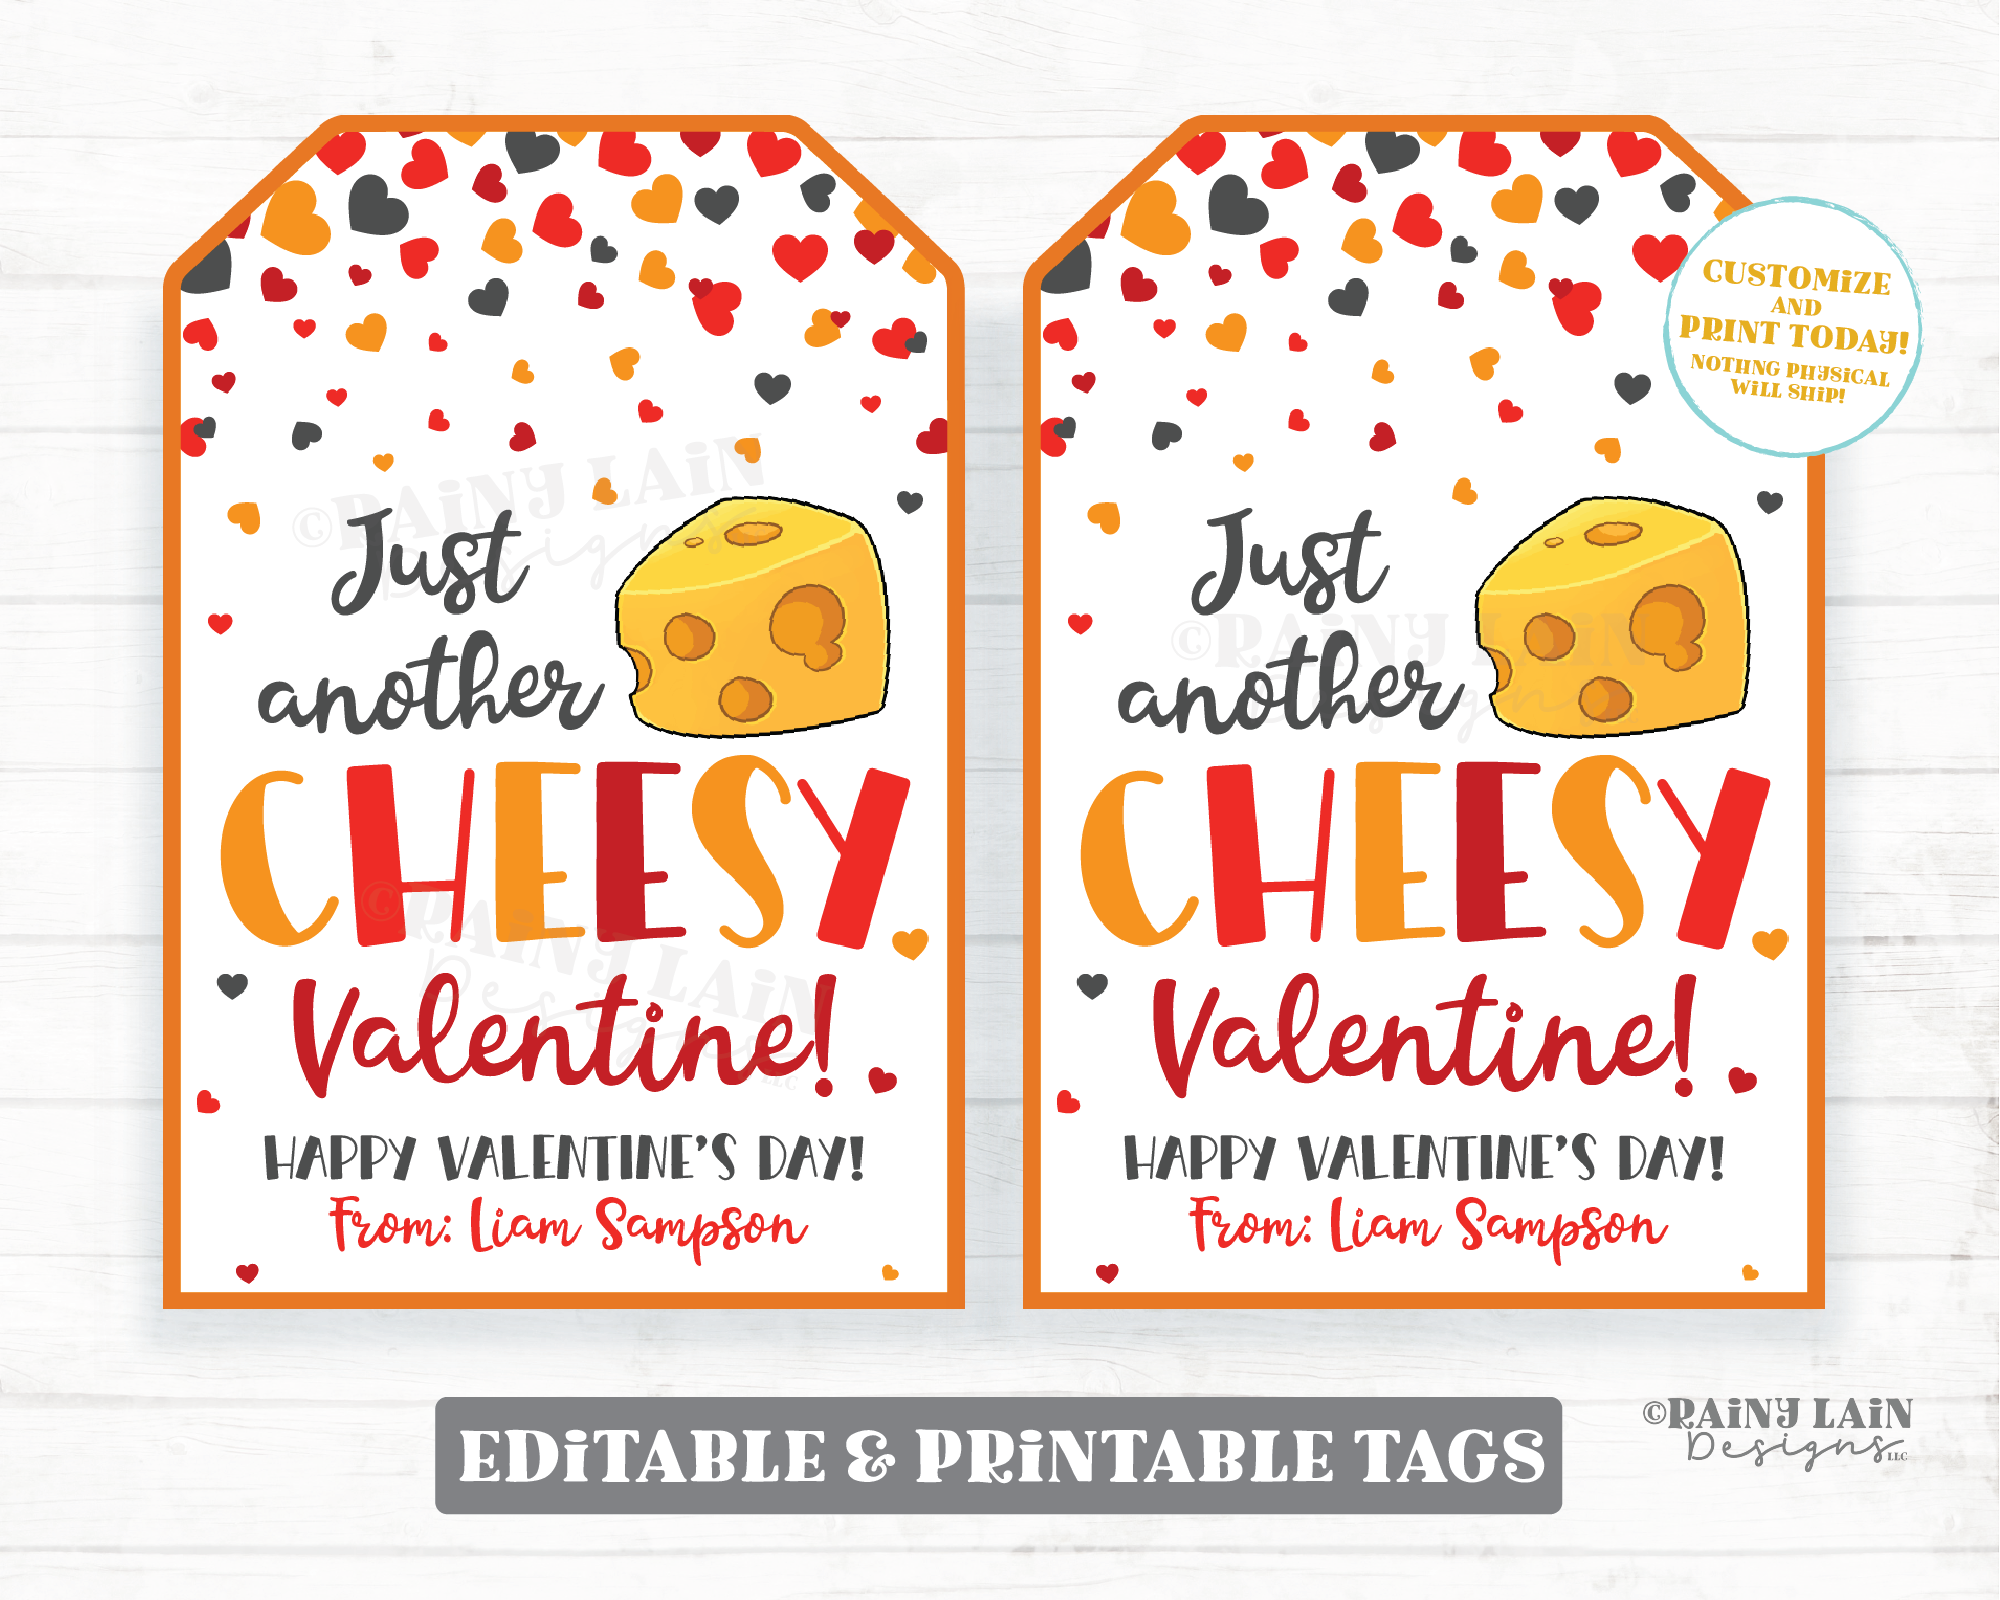 just-another-cheesy-valentine-tag-cheese-crackers-cheez-goldfish-valen